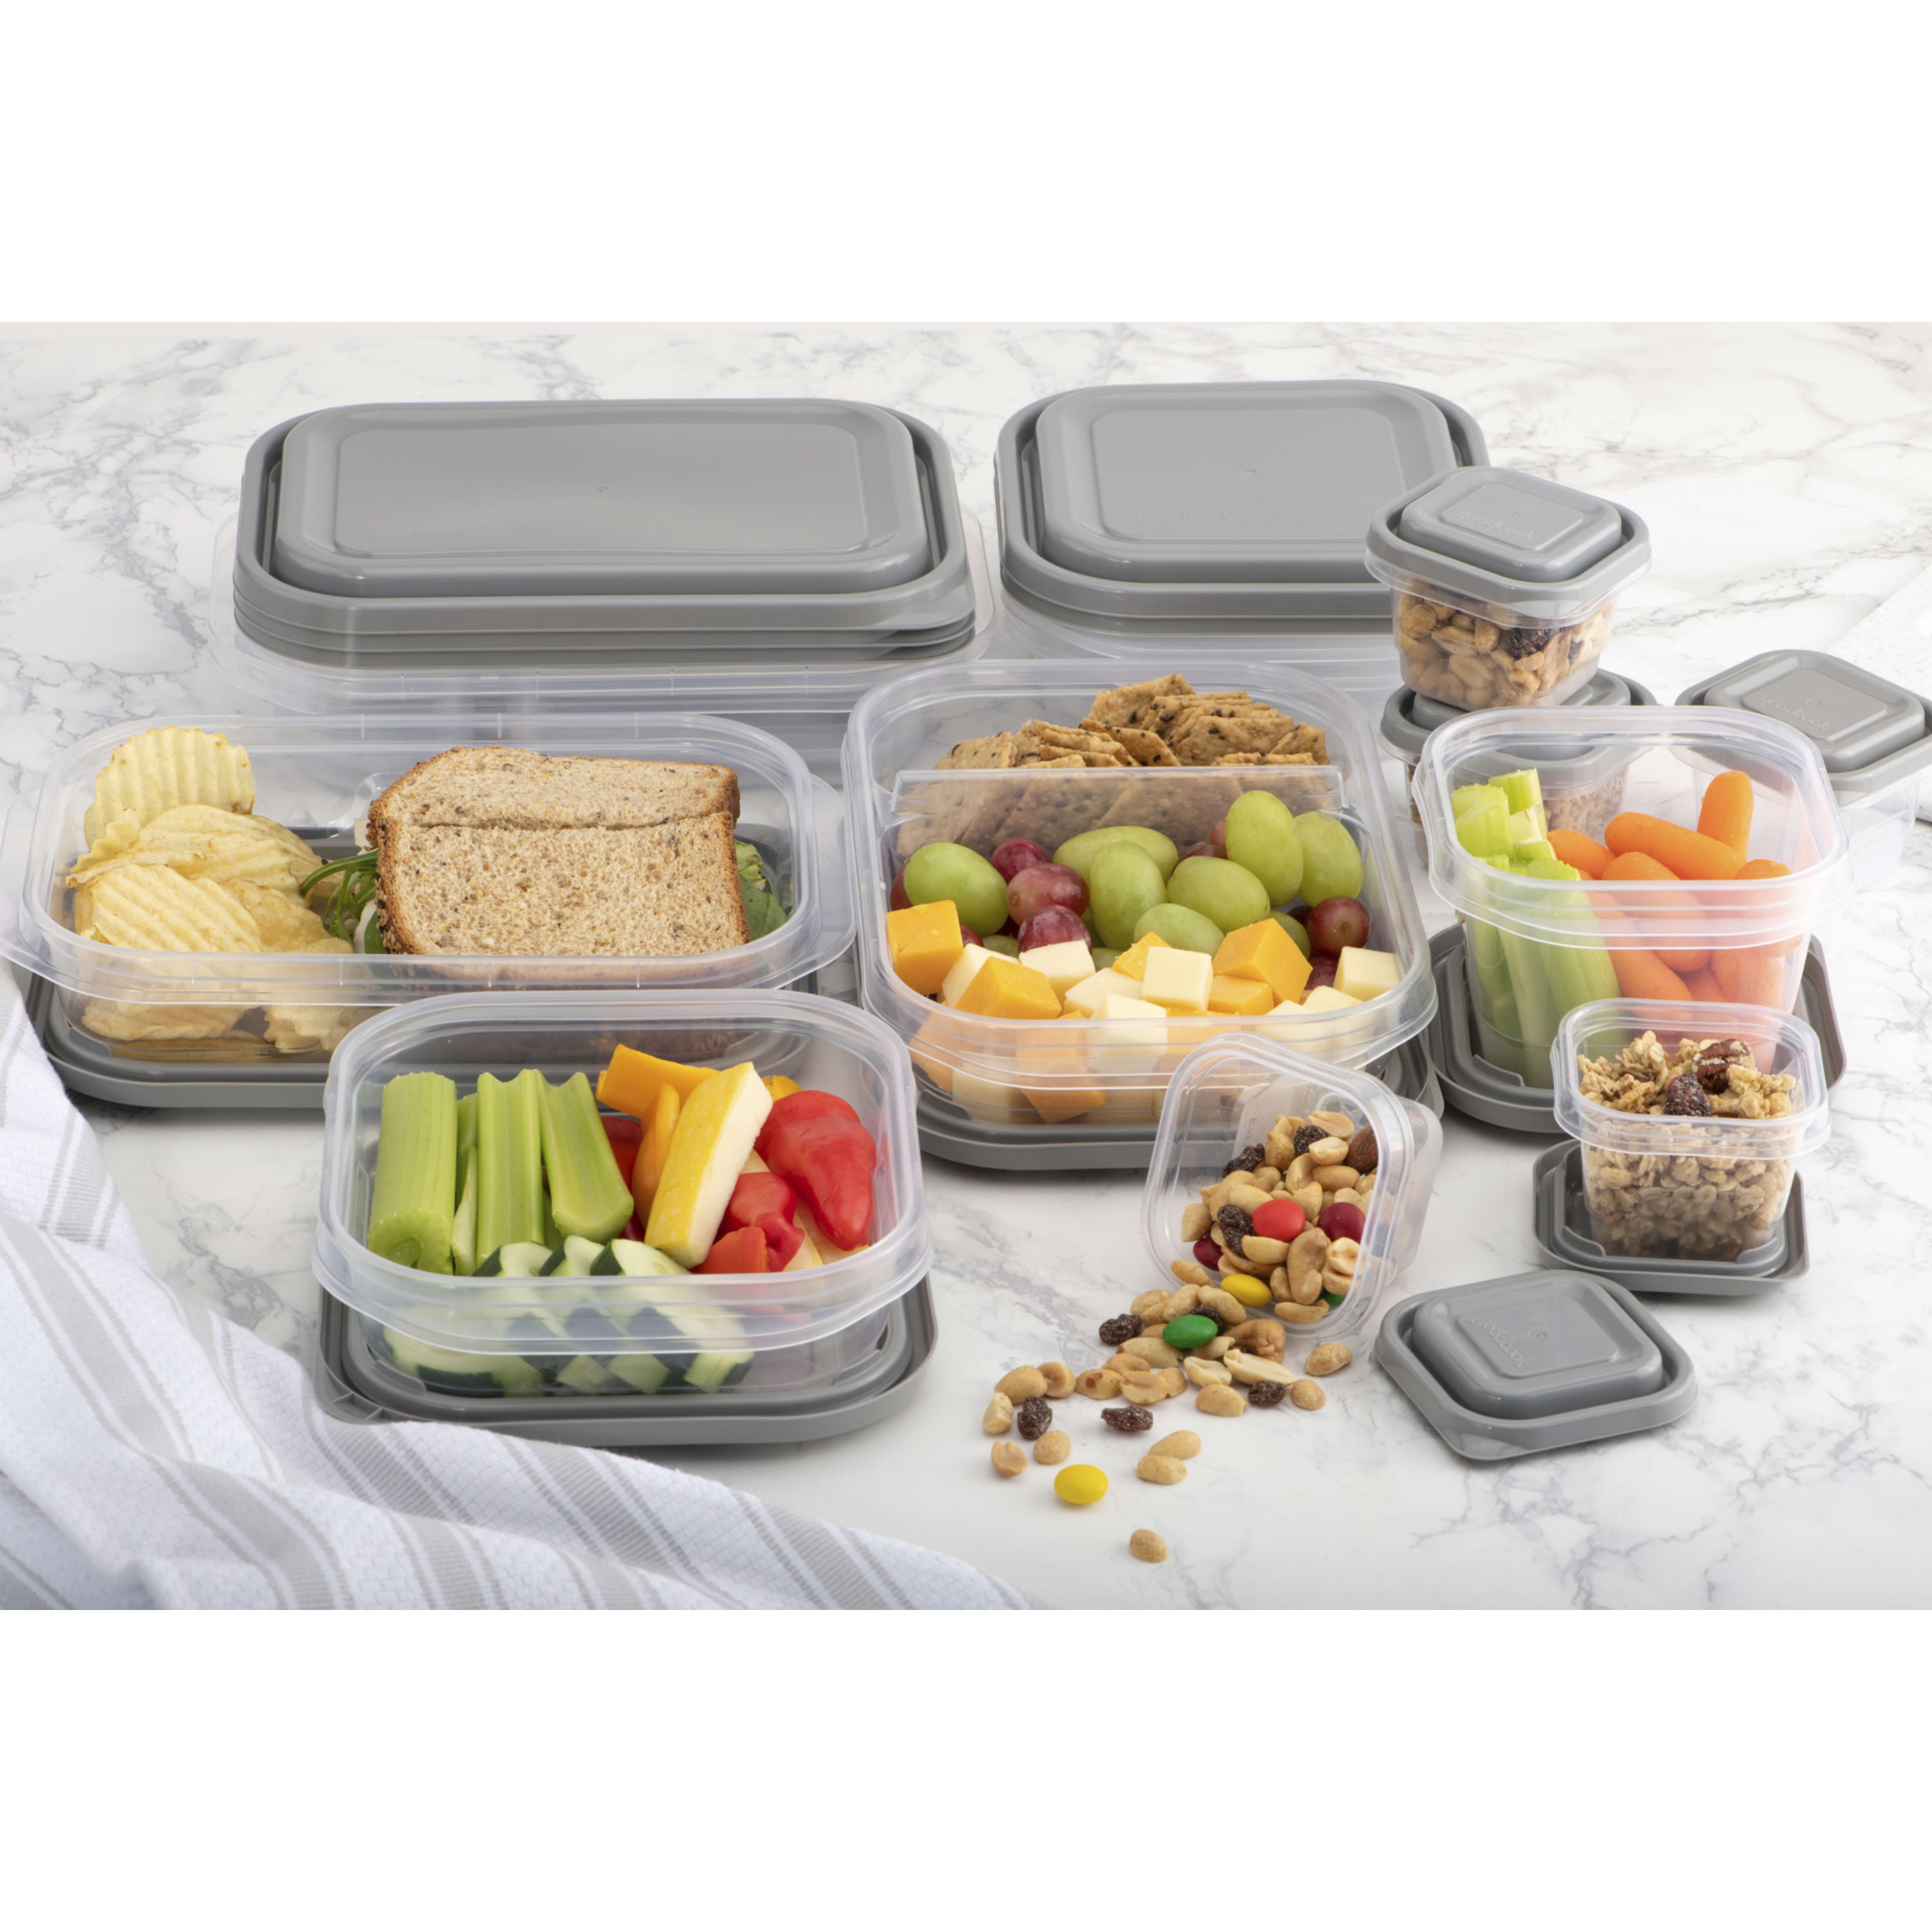 Goodcook Everyware Set Food Storage Containers With Lids - 40pc